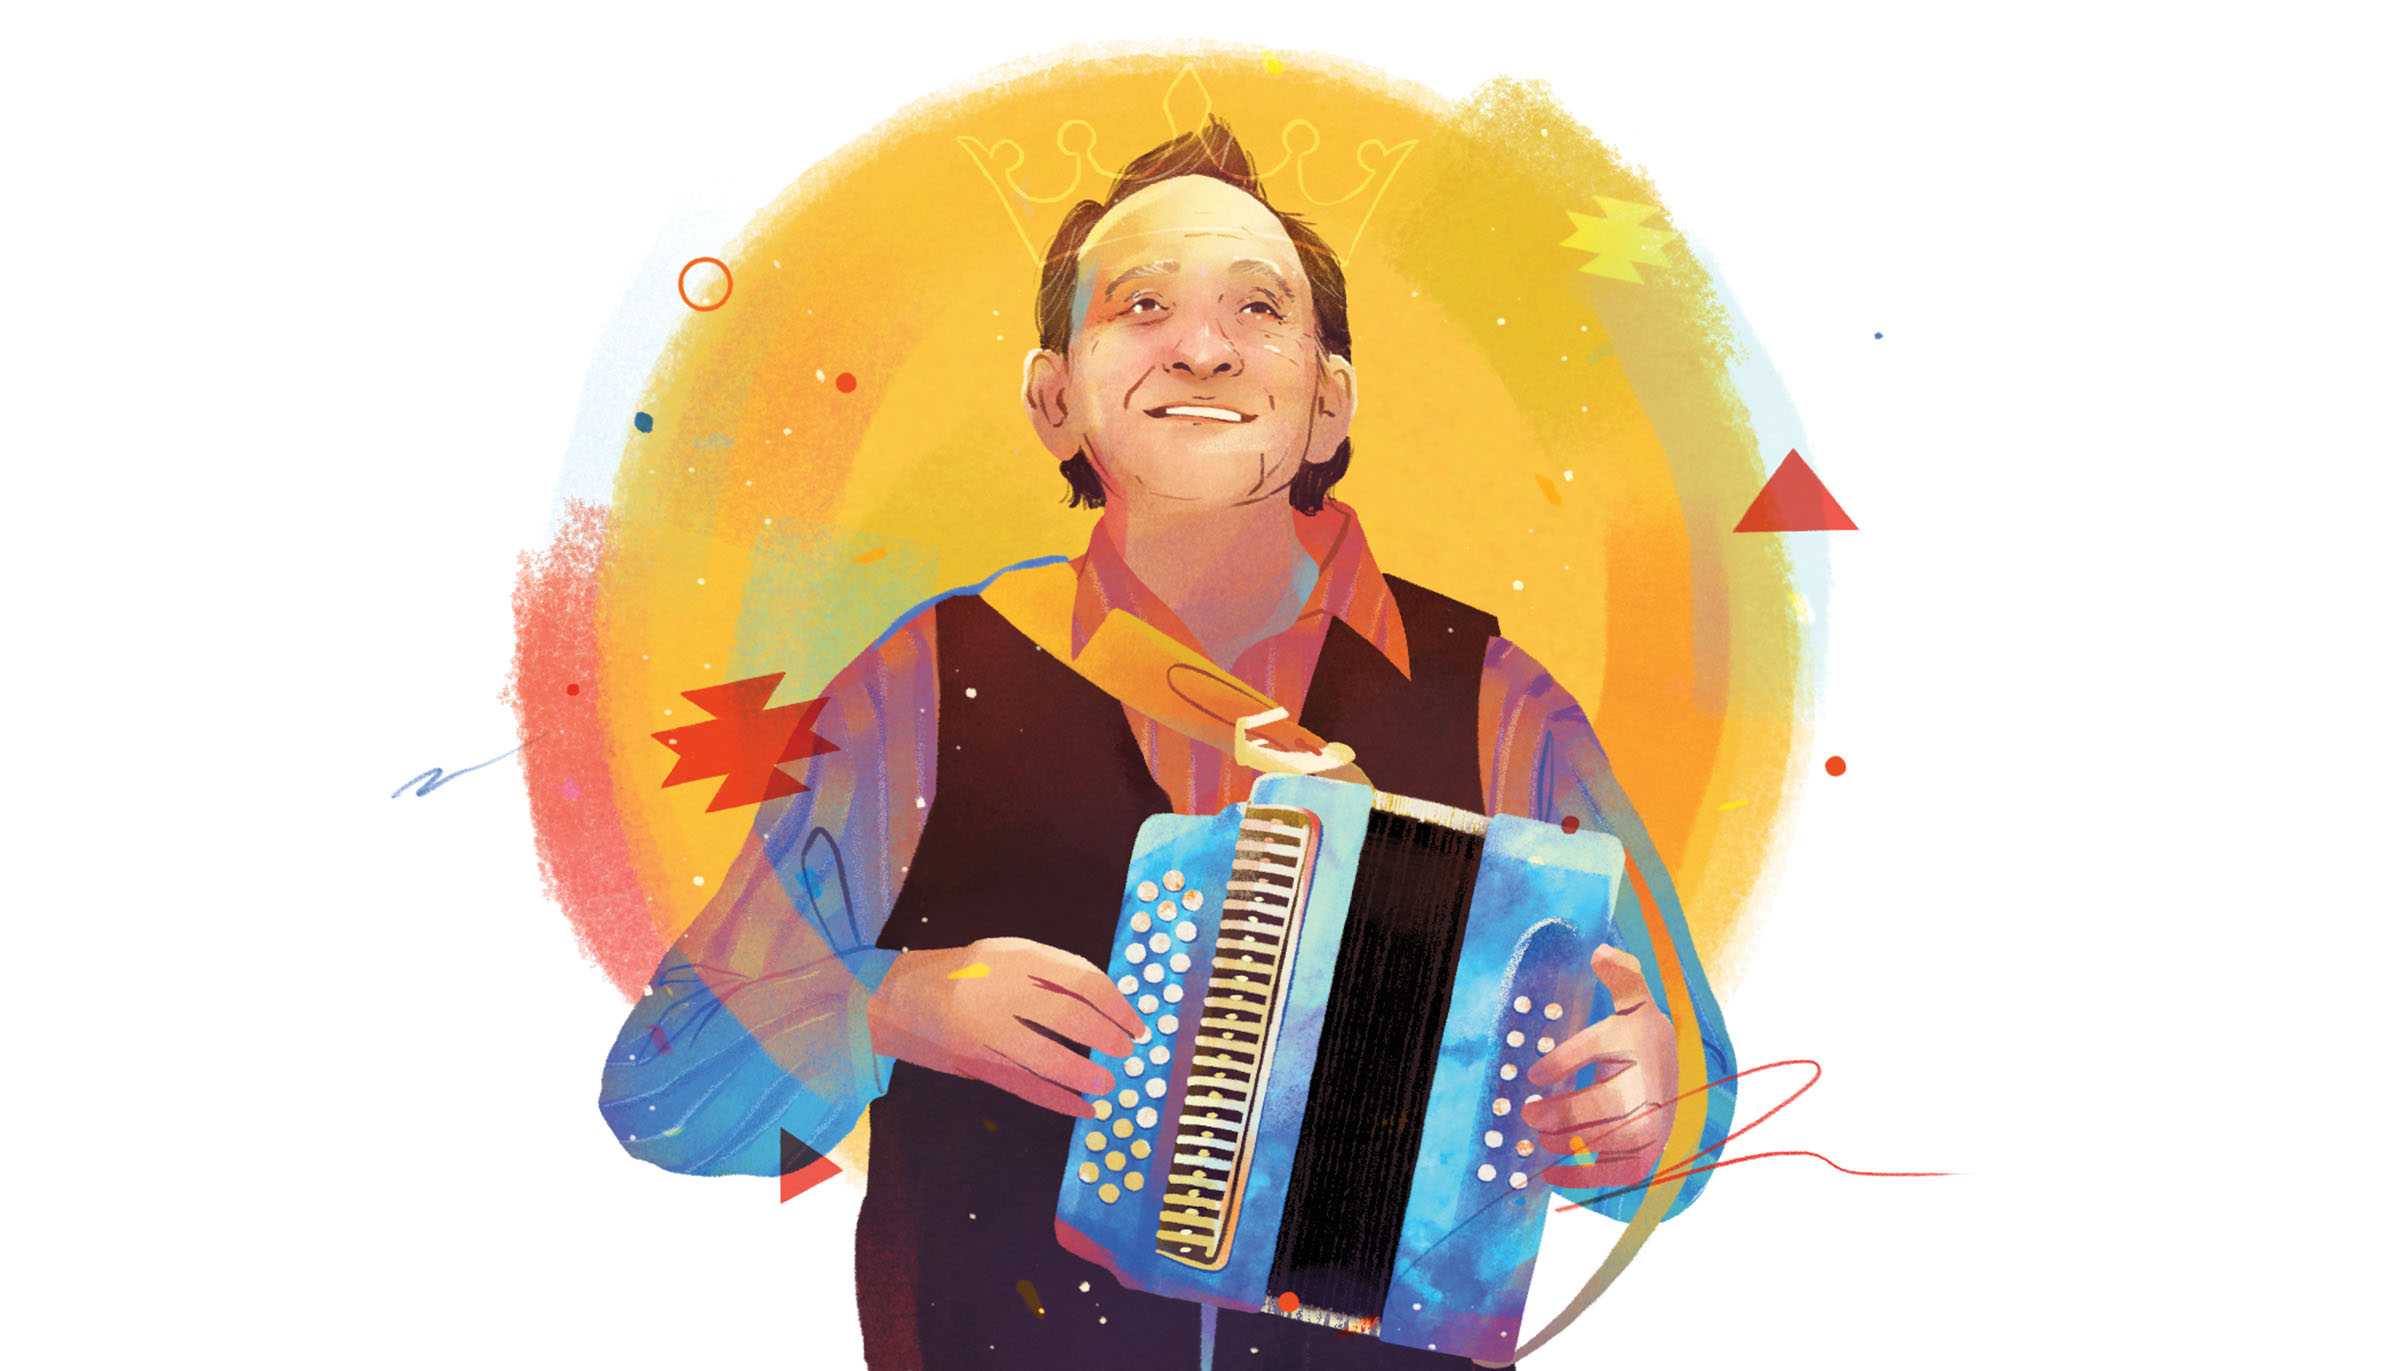 An illustration of a man smiling and playing an accordion